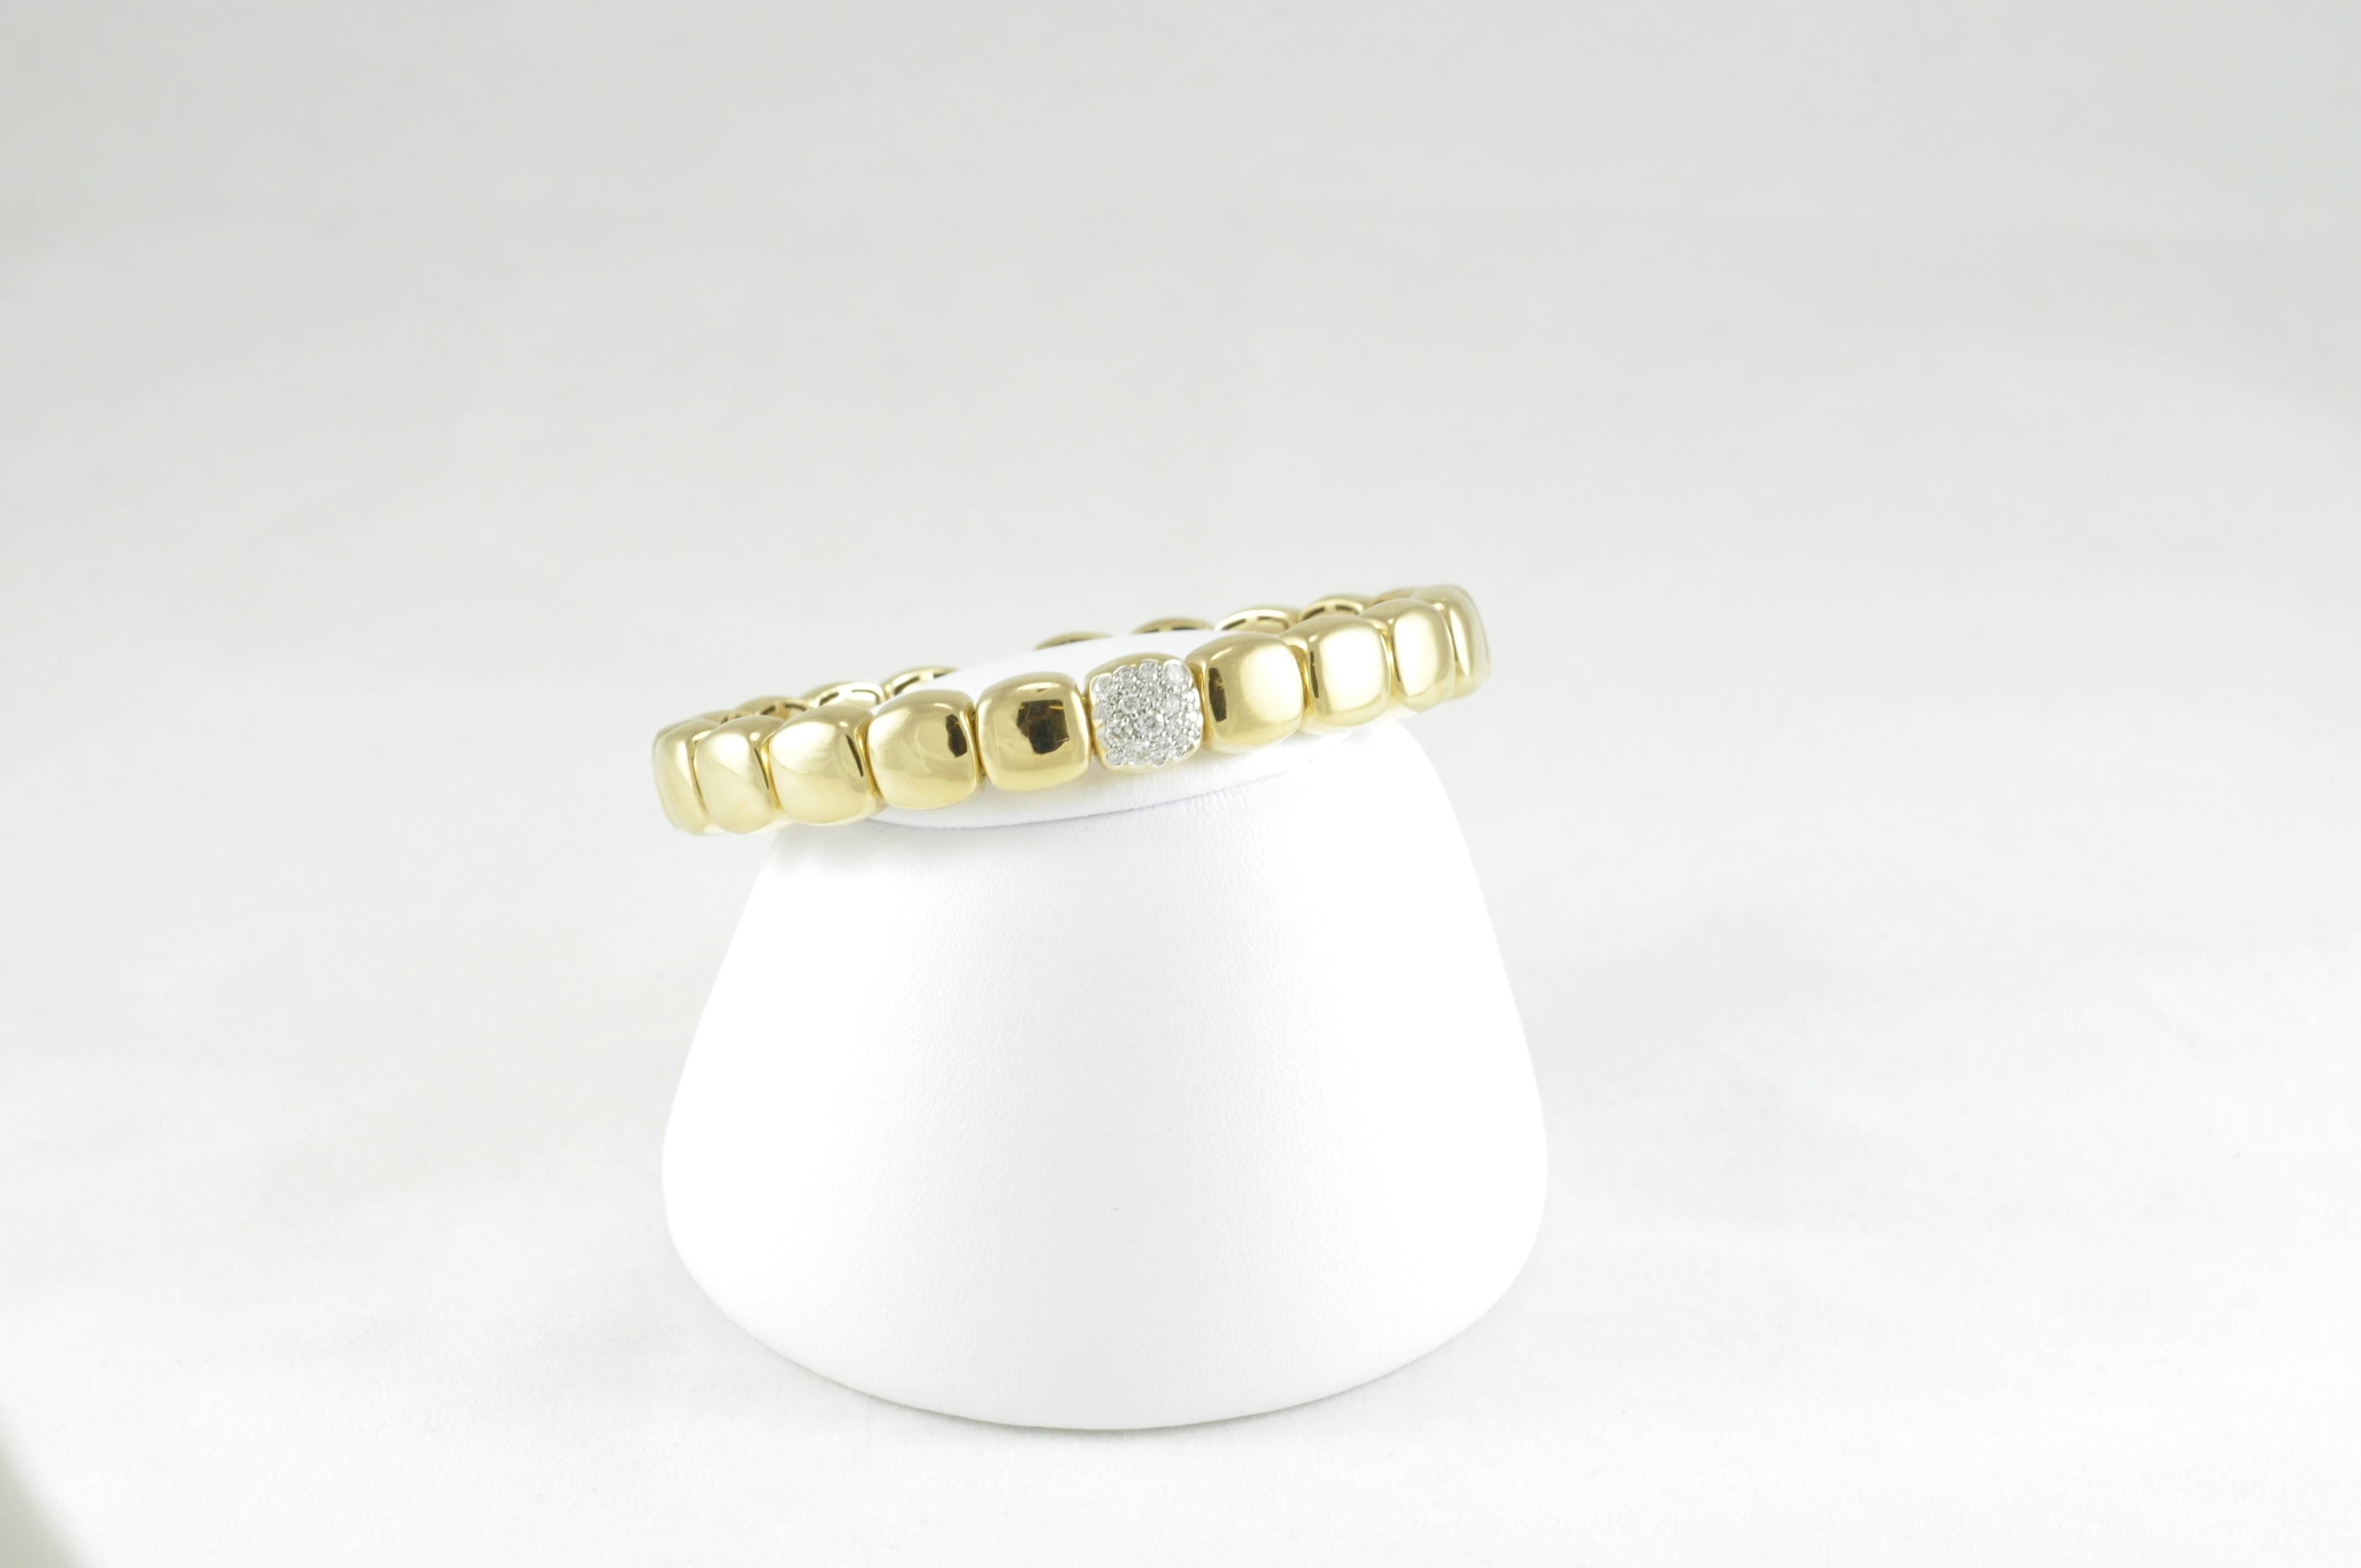 18k yellow gold with diamonds set in white gold. Spring Gold allows for back of bracelet to easily open and close without clasp. Chic bracelet made in Italy by acclaimed designer Antonio Papini. 